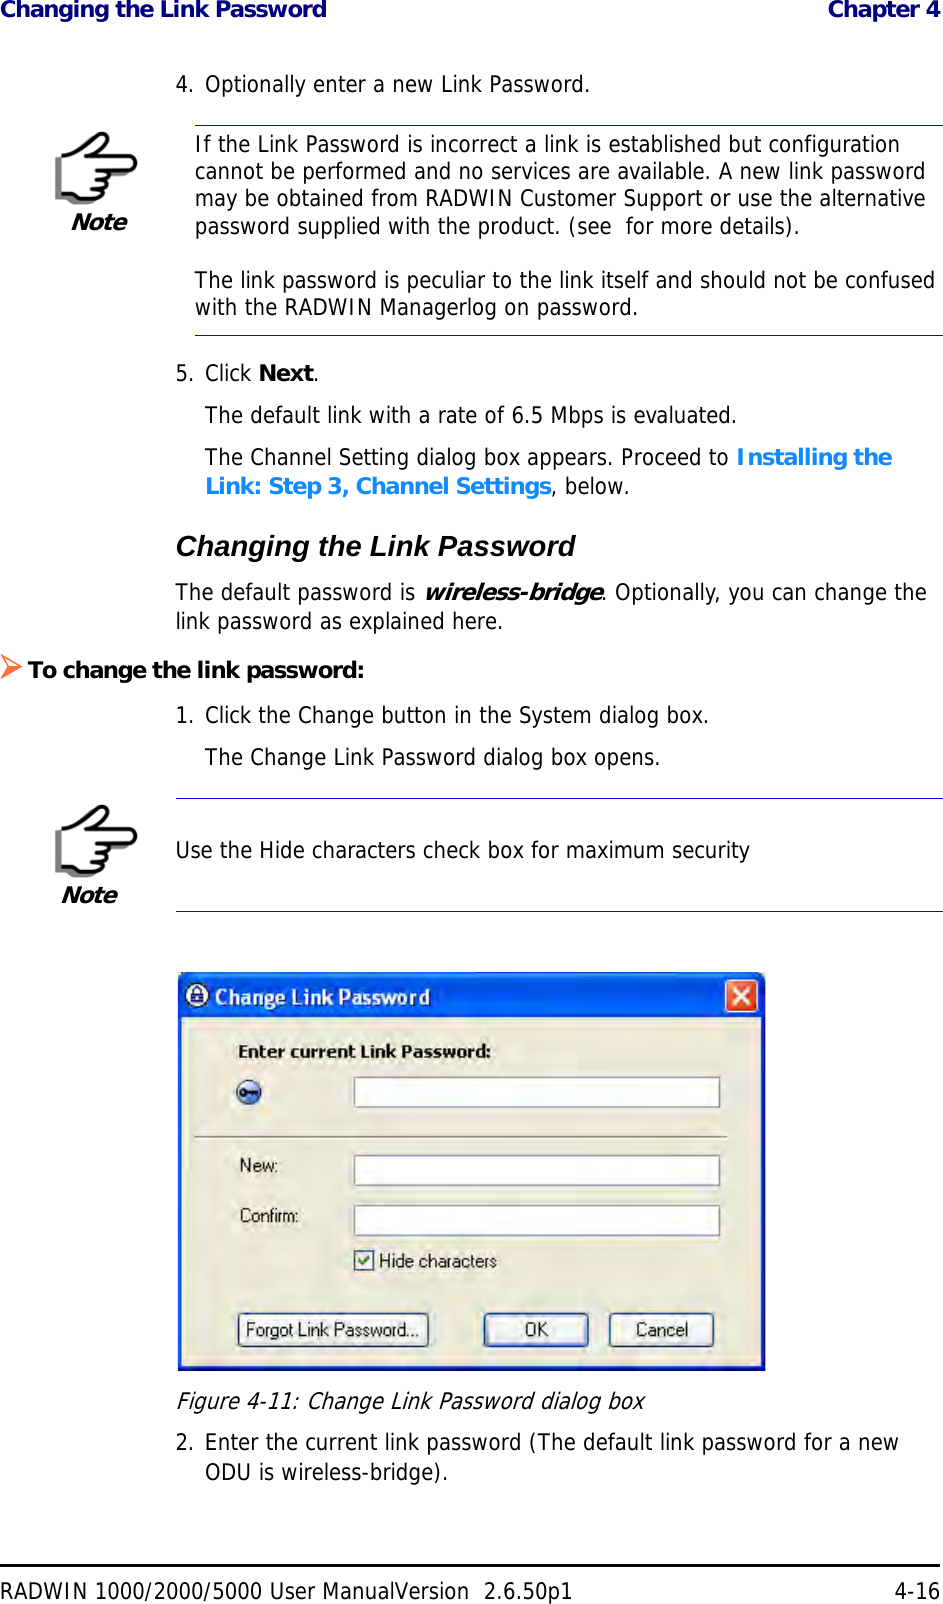 Changing the Link Password  Chapter 4RADWIN 1000/2000/5000 User ManualVersion  2.6.50p1 4-164. Optionally enter a new Link Password. 5. Click Next.The default link with a rate of 6.5 Mbps is evaluated.The Channel Setting dialog box appears. Proceed to Installing the Link: Step 3, Channel Settings, below.Changing the Link PasswordThe default password is wireless-bridge. Optionally, you can change the link password as explained here.To change the link password:1. Click the Change button in the System dialog box.The Change Link Password dialog box opens.Figure 4-11: Change Link Password dialog box2. Enter the current link password (The default link password for a new ODU is wireless-bridge).NoteIf the Link Password is incorrect a link is established but configuration cannot be performed and no services are available. A new link password may be obtained from RADWIN Customer Support or use the alternative password supplied with the product. (see  for more details).The link password is peculiar to the link itself and should not be confused with the RADWIN Managerlog on password.NoteUse the Hide characters check box for maximum security